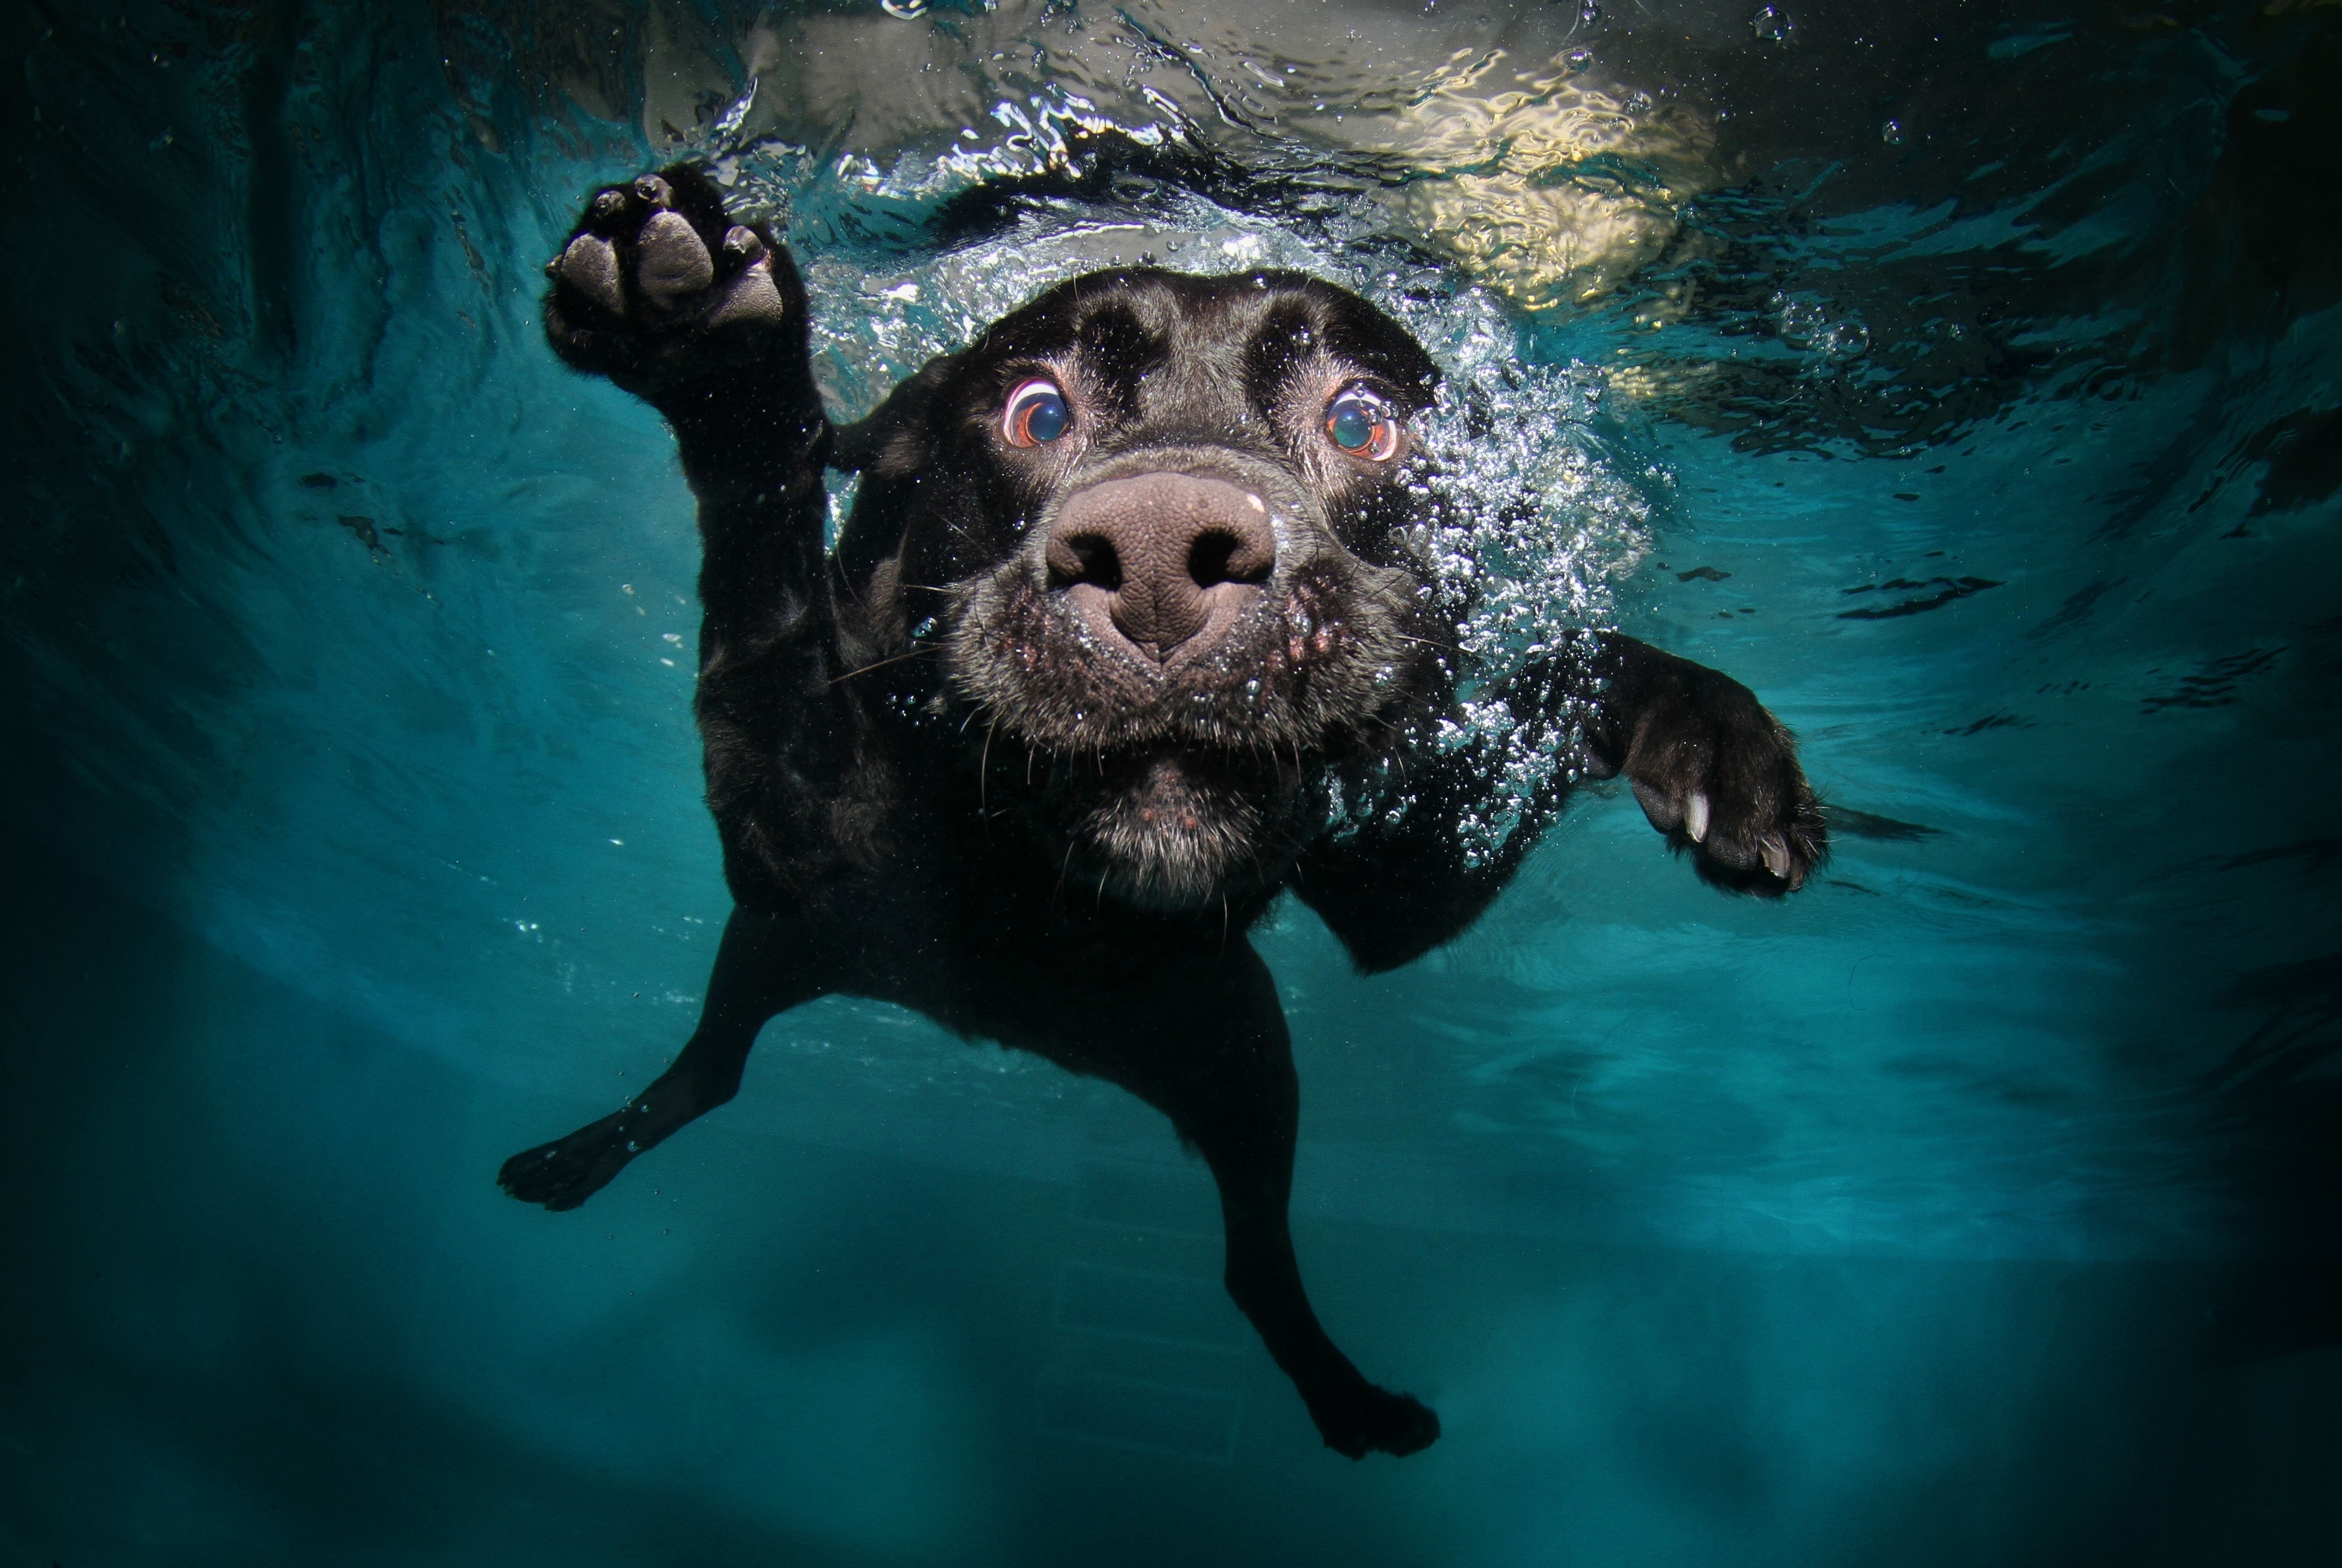 70713 download wallpaper water, animals, black, dog, under water, underwater, swims, floats screensavers and pictures for free